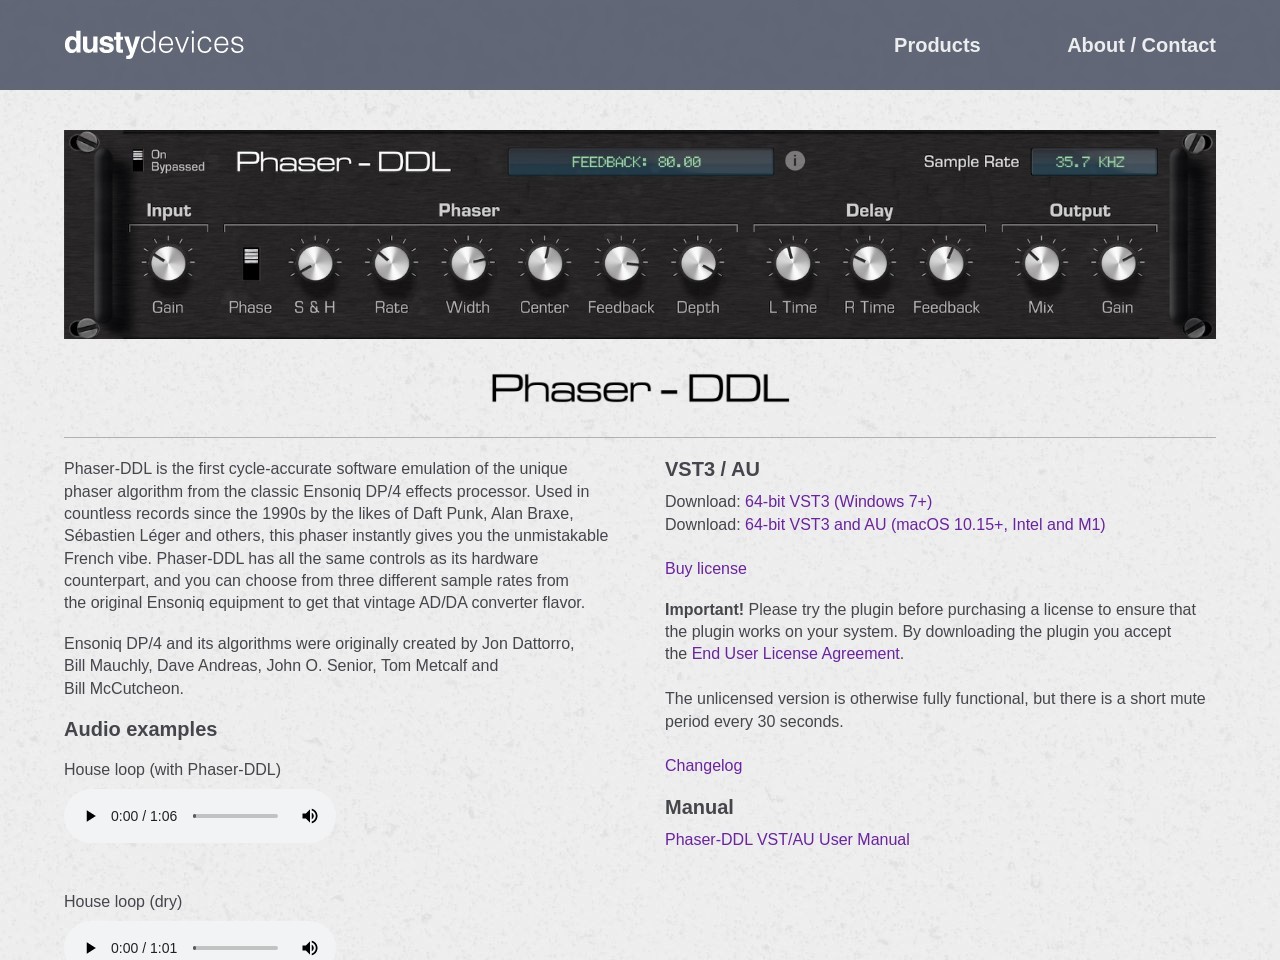 Phaser-DDL - Dusty Devices